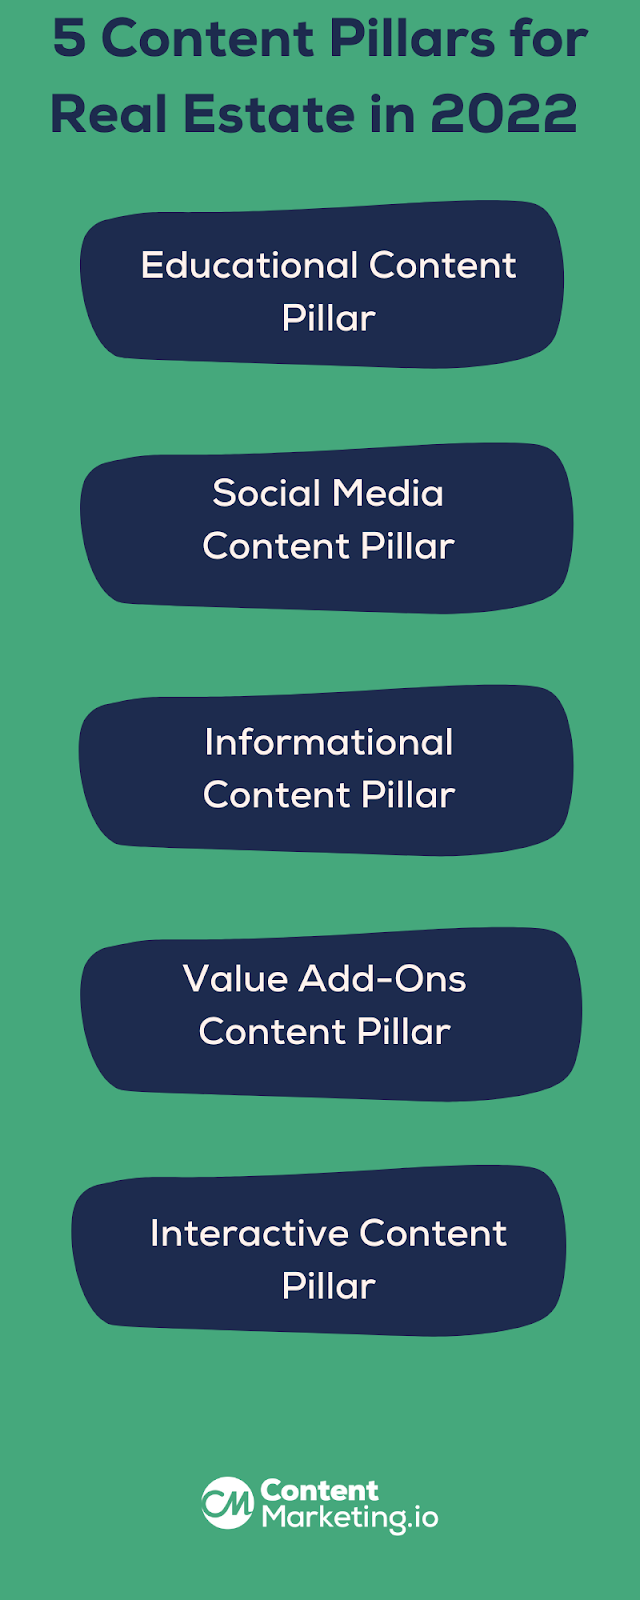 Content Pillars for Real Estate